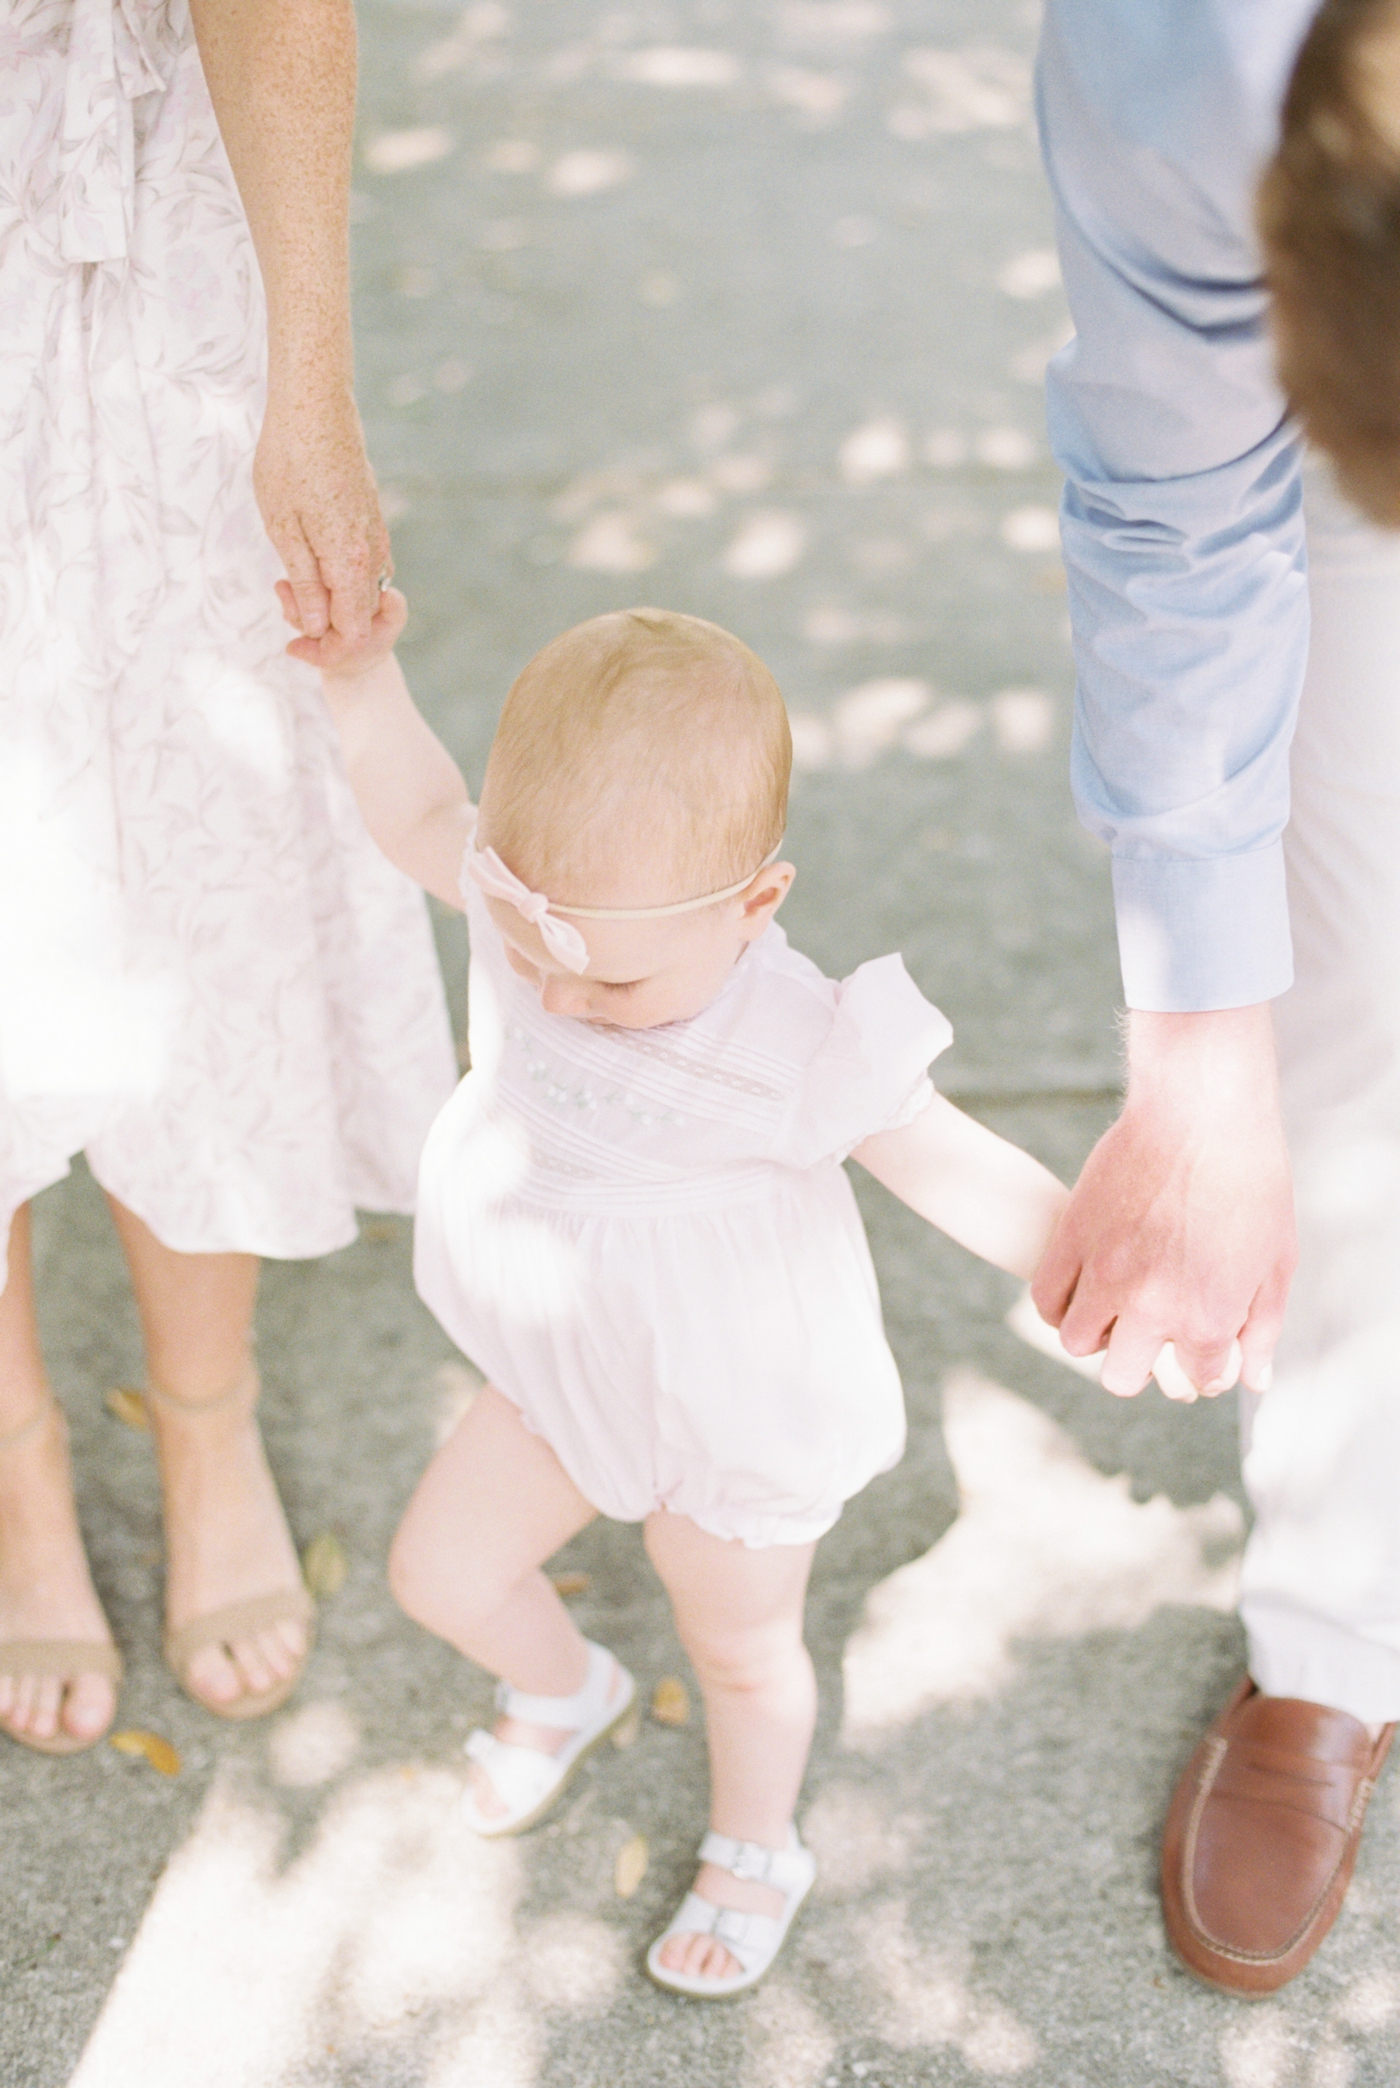 Baby girl with pink headband holding mom and dad's hands | Photo by Caitlyn Motycka Photography.